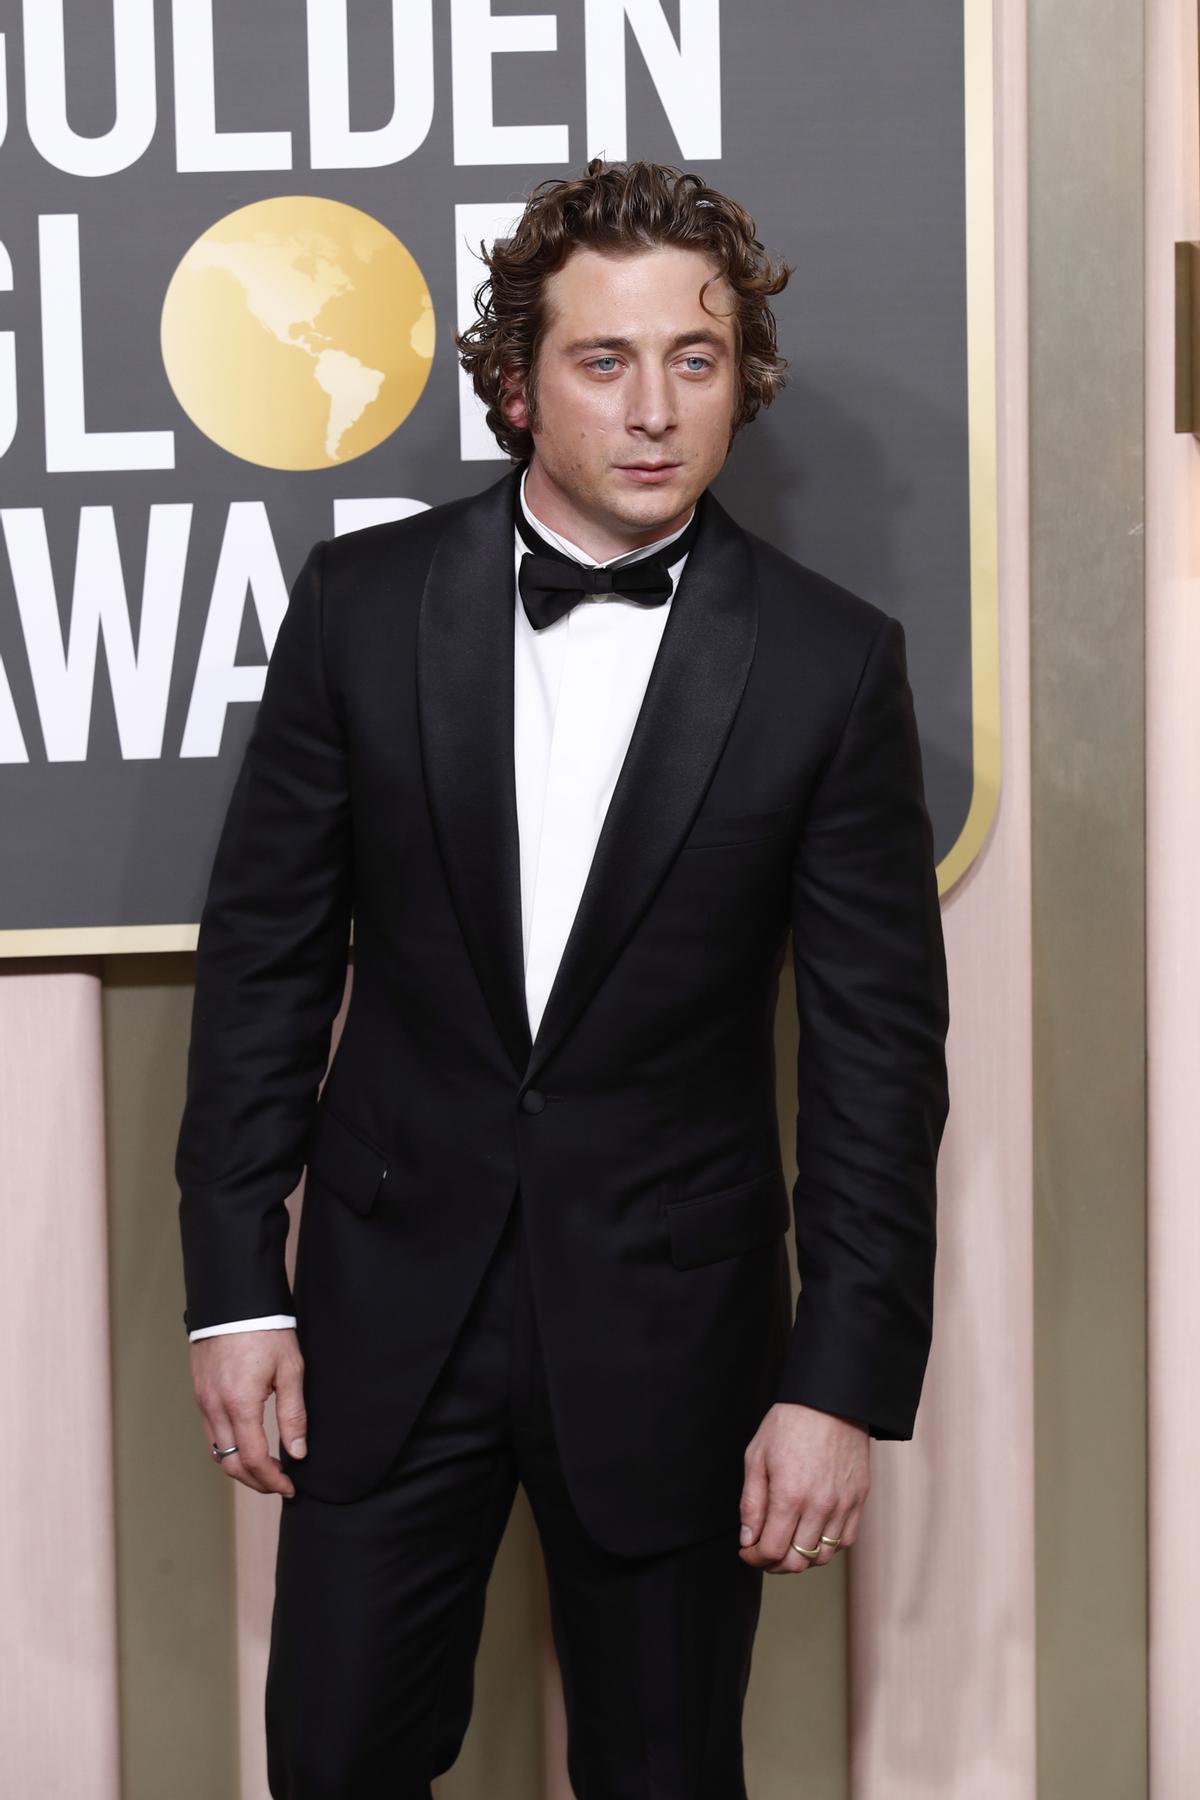 Beverly Hills (United States), 11/01/2023.- Jeremy Allen White arrives for the 80th annual Golden Globe Awards ceremony at the Beverly Hilton Hotel, in Beverly Hills, California, USA, 10 January 2023. Artists in various film and television categories are awarded Golden Globes by the Hollywood Foreign Press Association. (Estados Unidos) EFE/EPA/CAROLINE BREHMAN